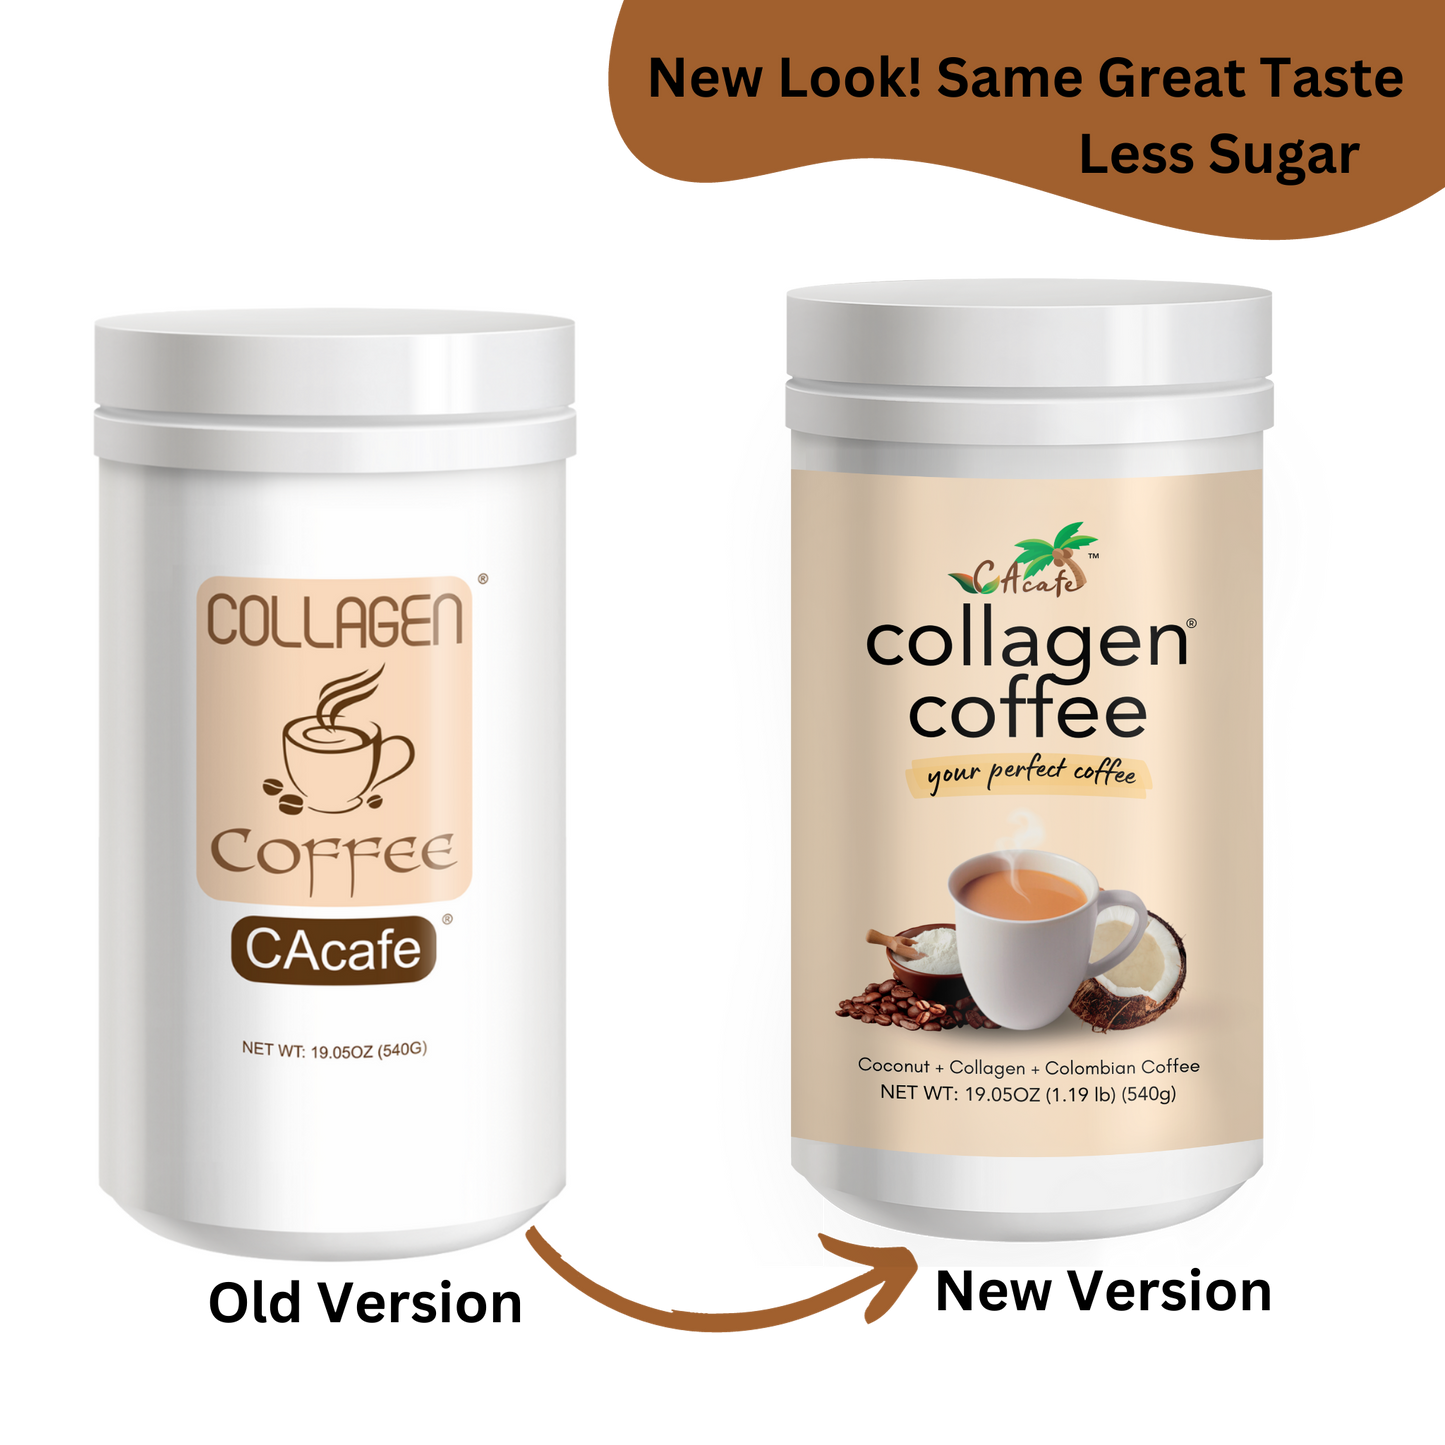 2 pack of Collagen Coffee (New Look)- 19.05oz each